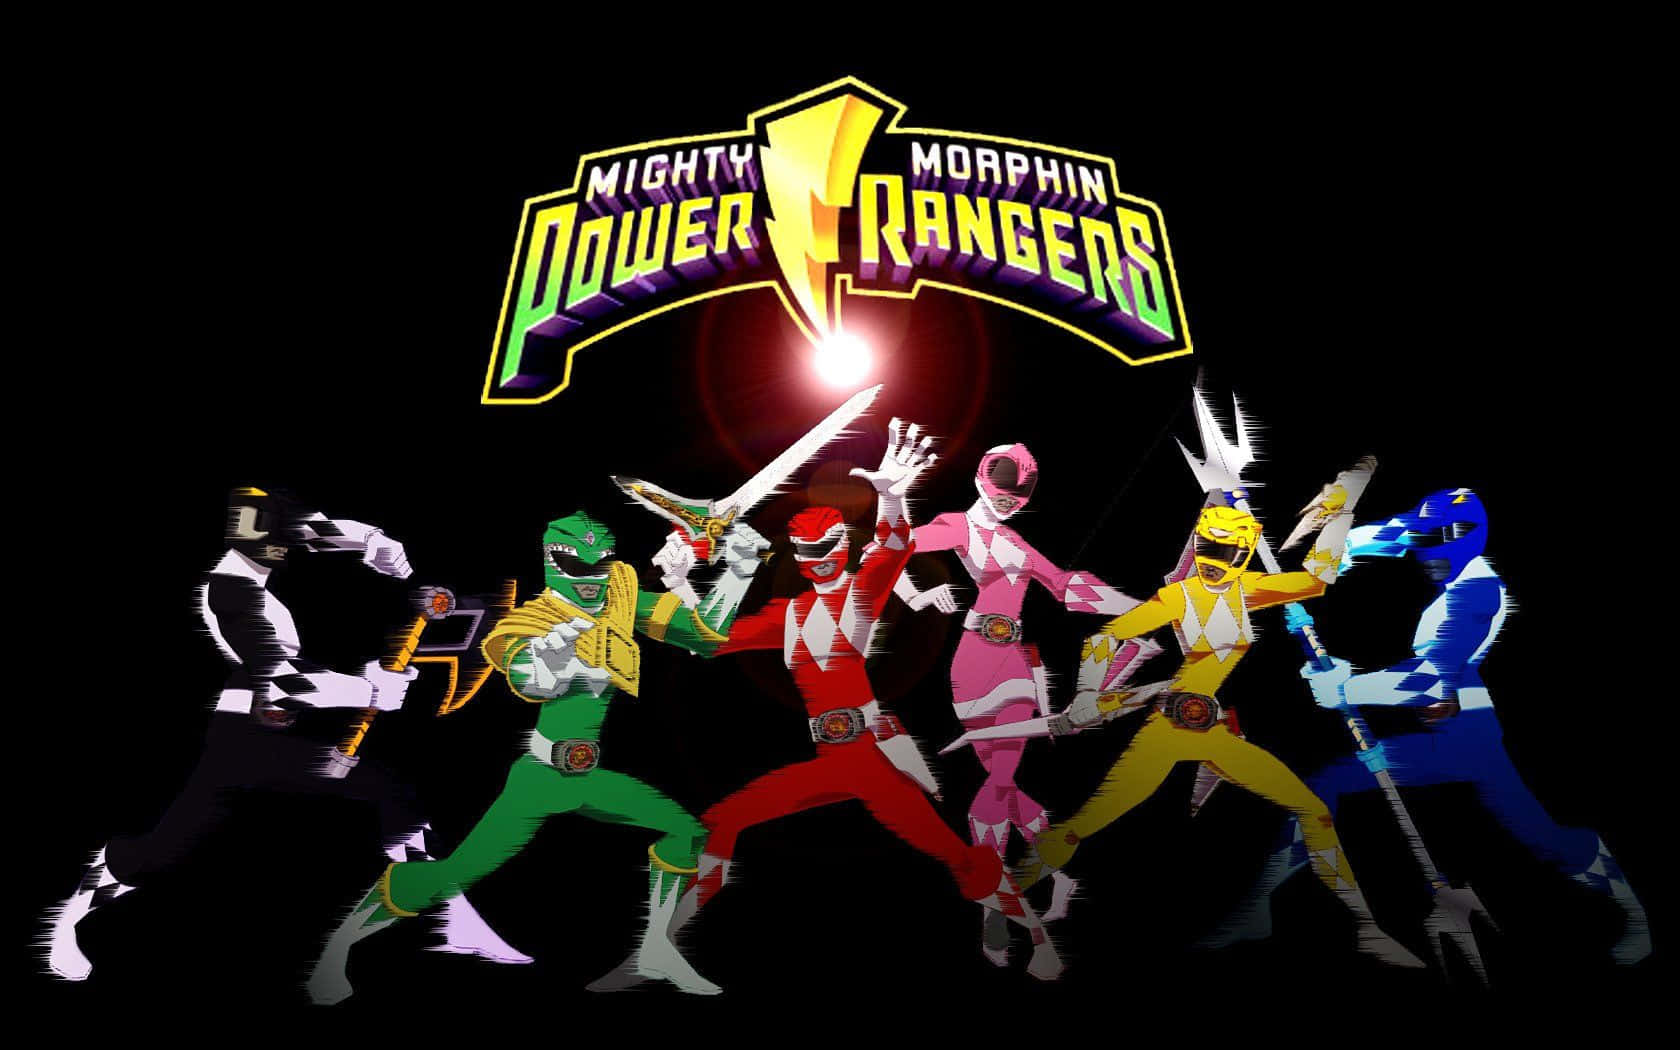 A dynamic group of Power Rangers ready for battle